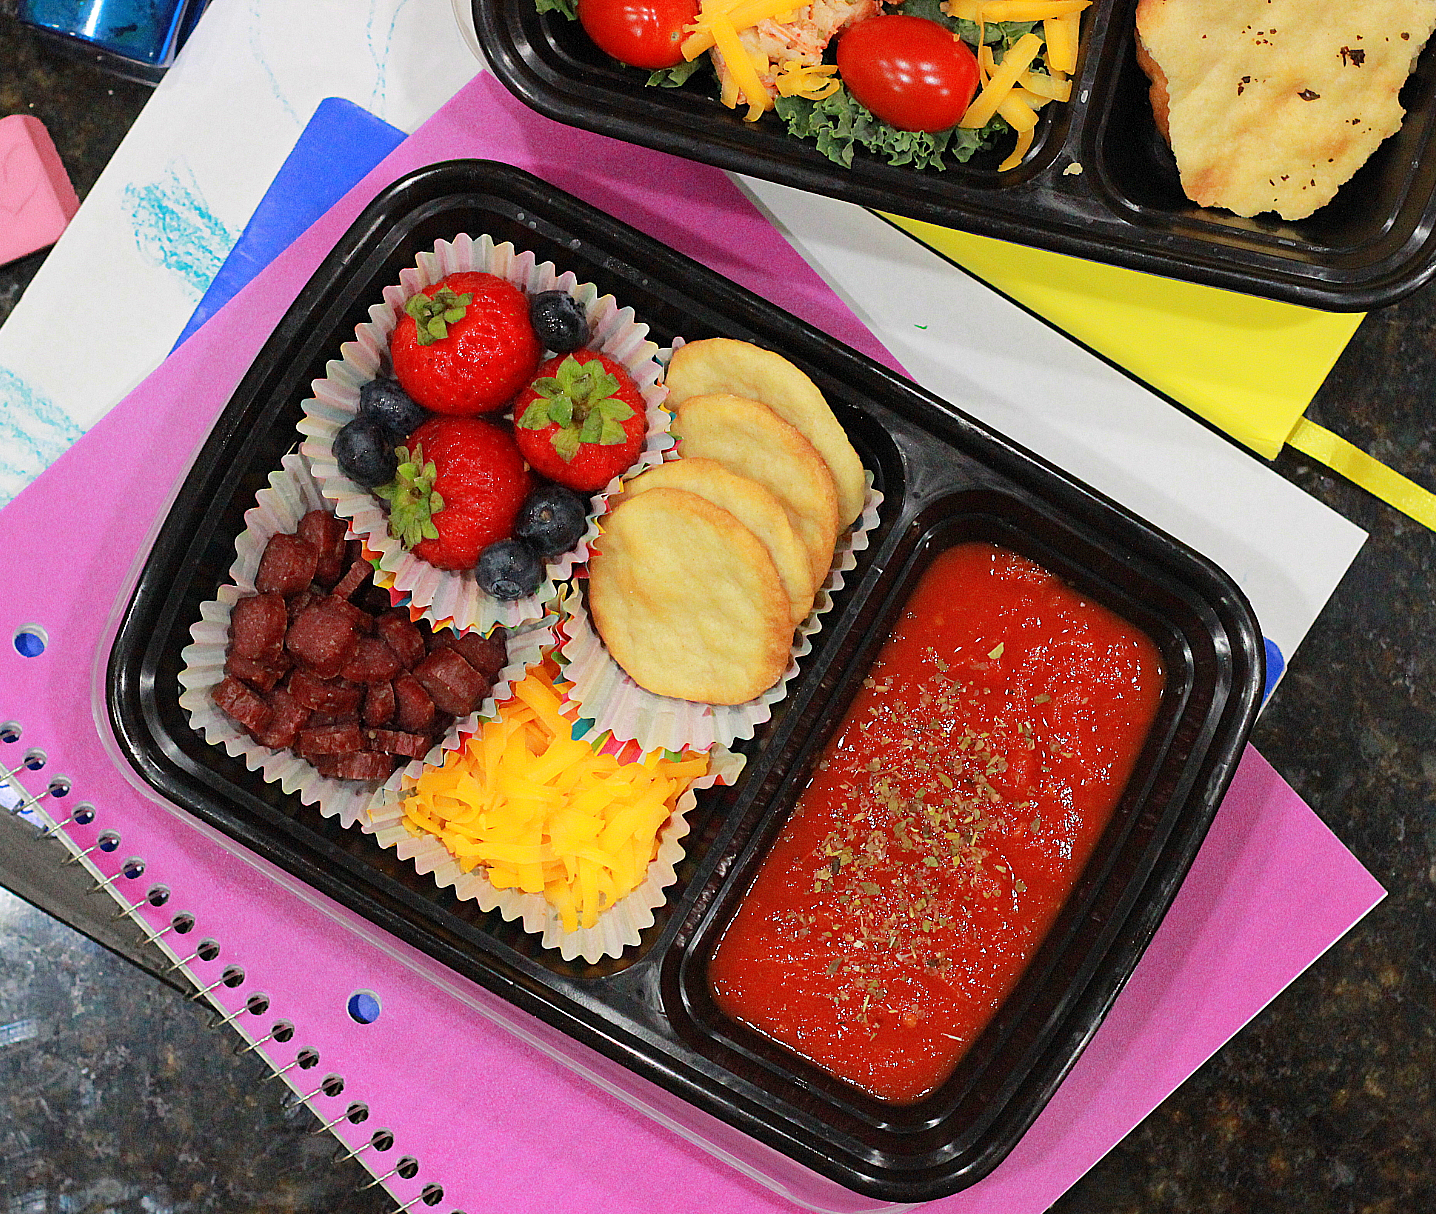 How to Make DIY Homemade Lunchables (8 Ways)